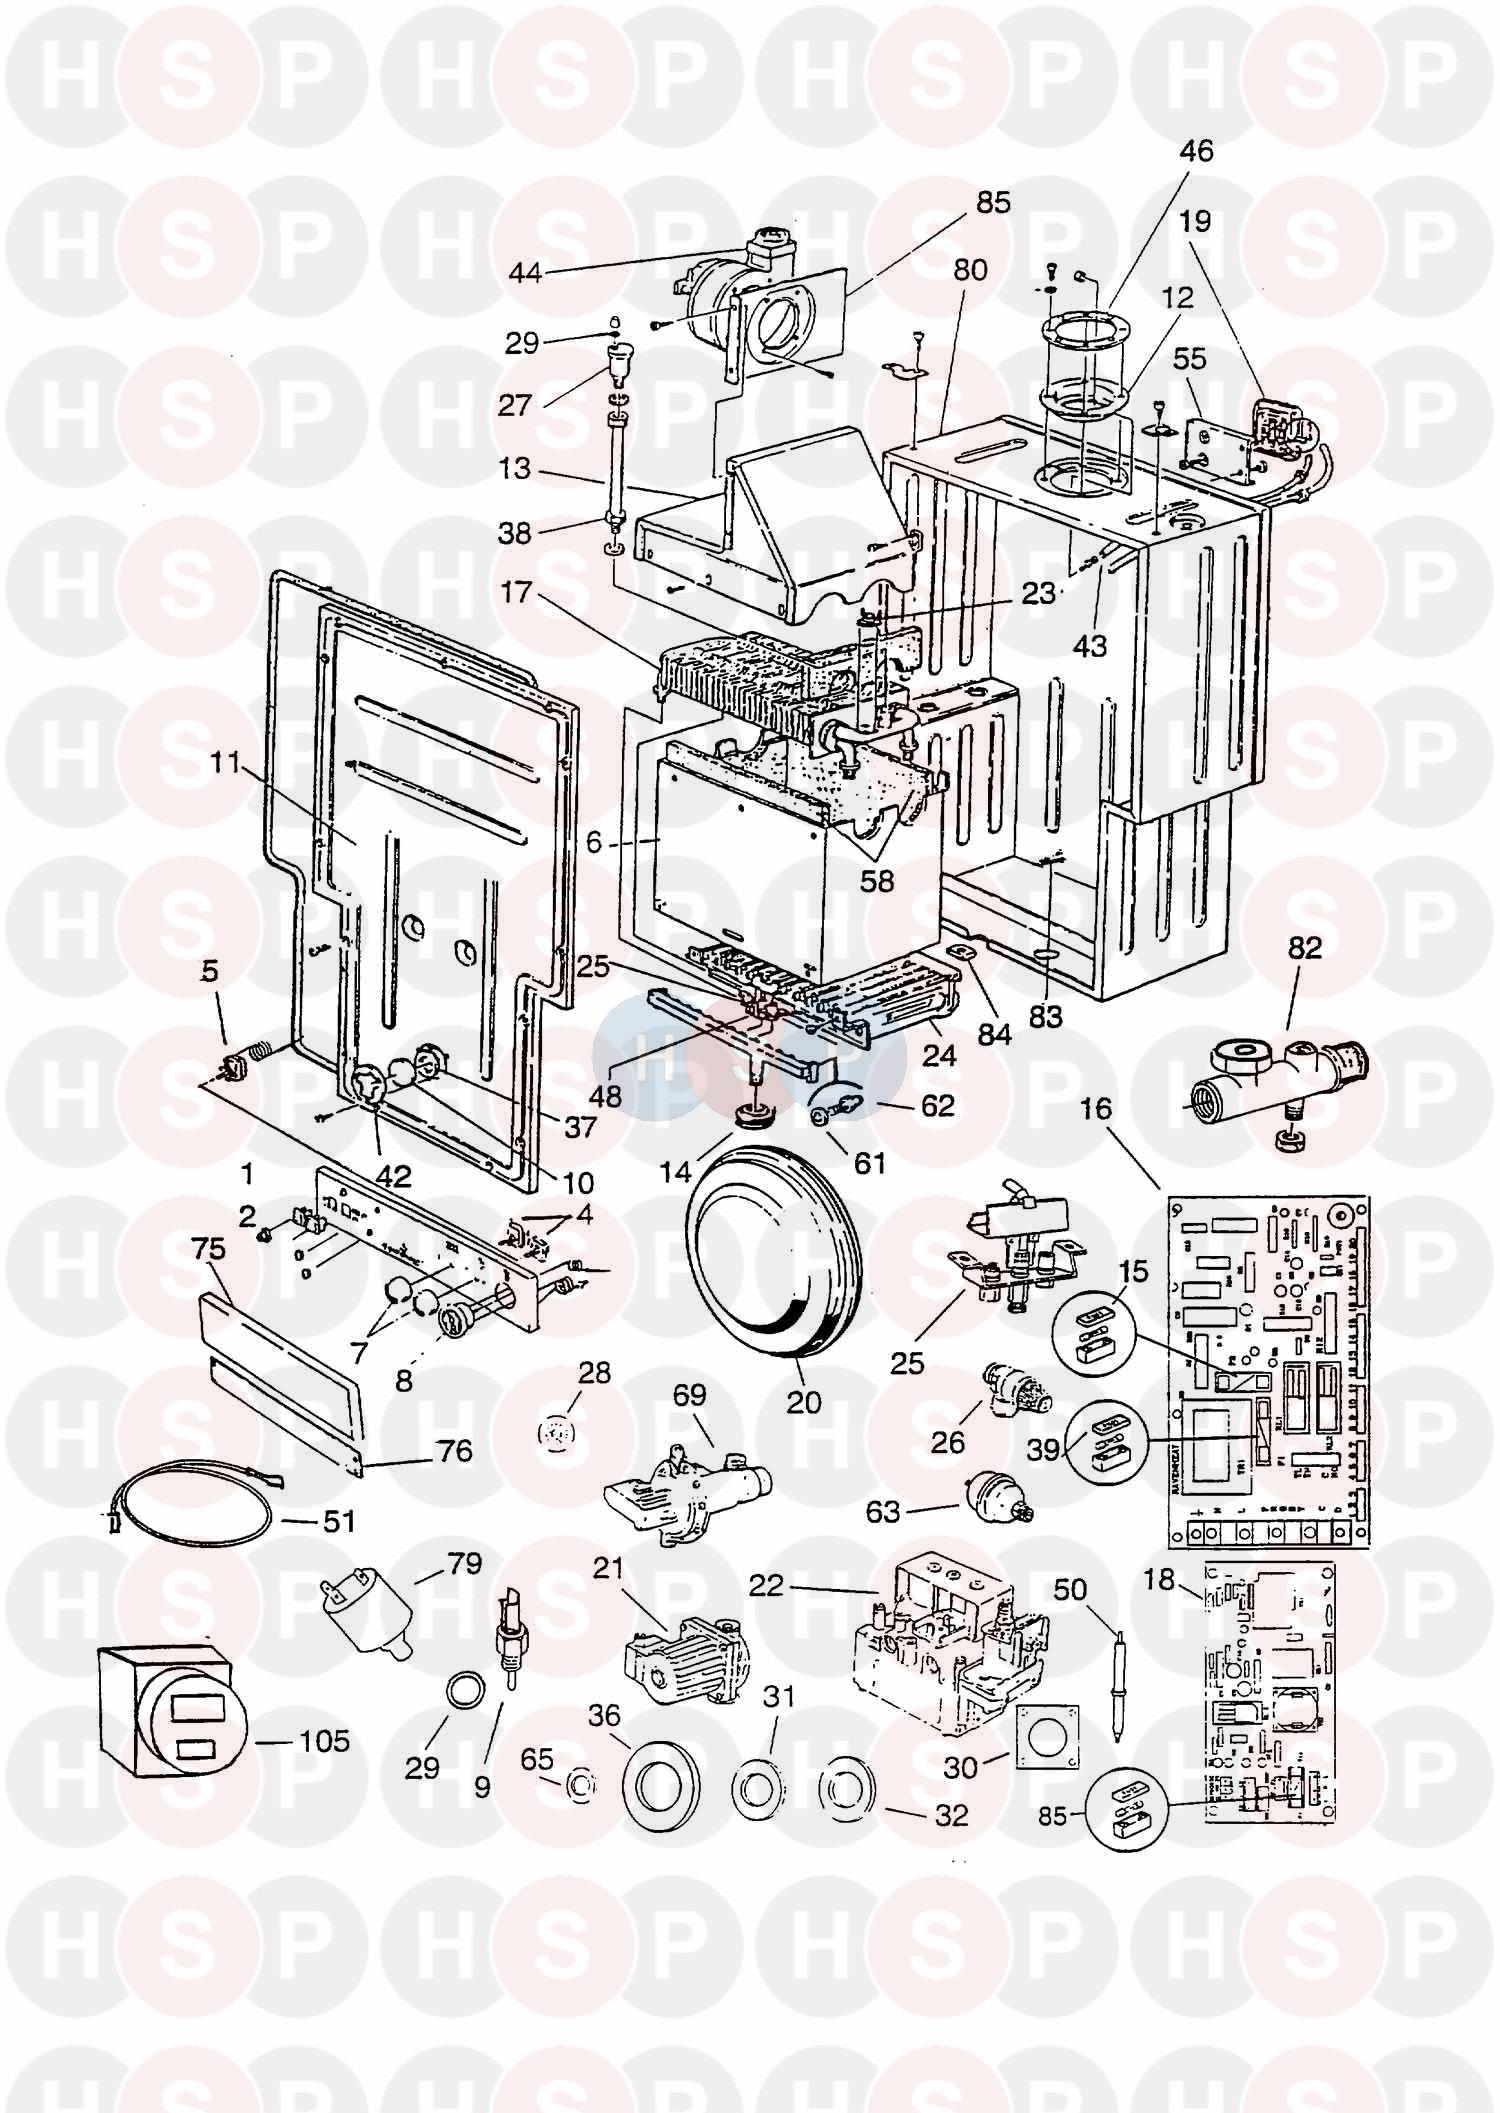 Exploded View diagram for Ravenheat RSF 25/20E LPG